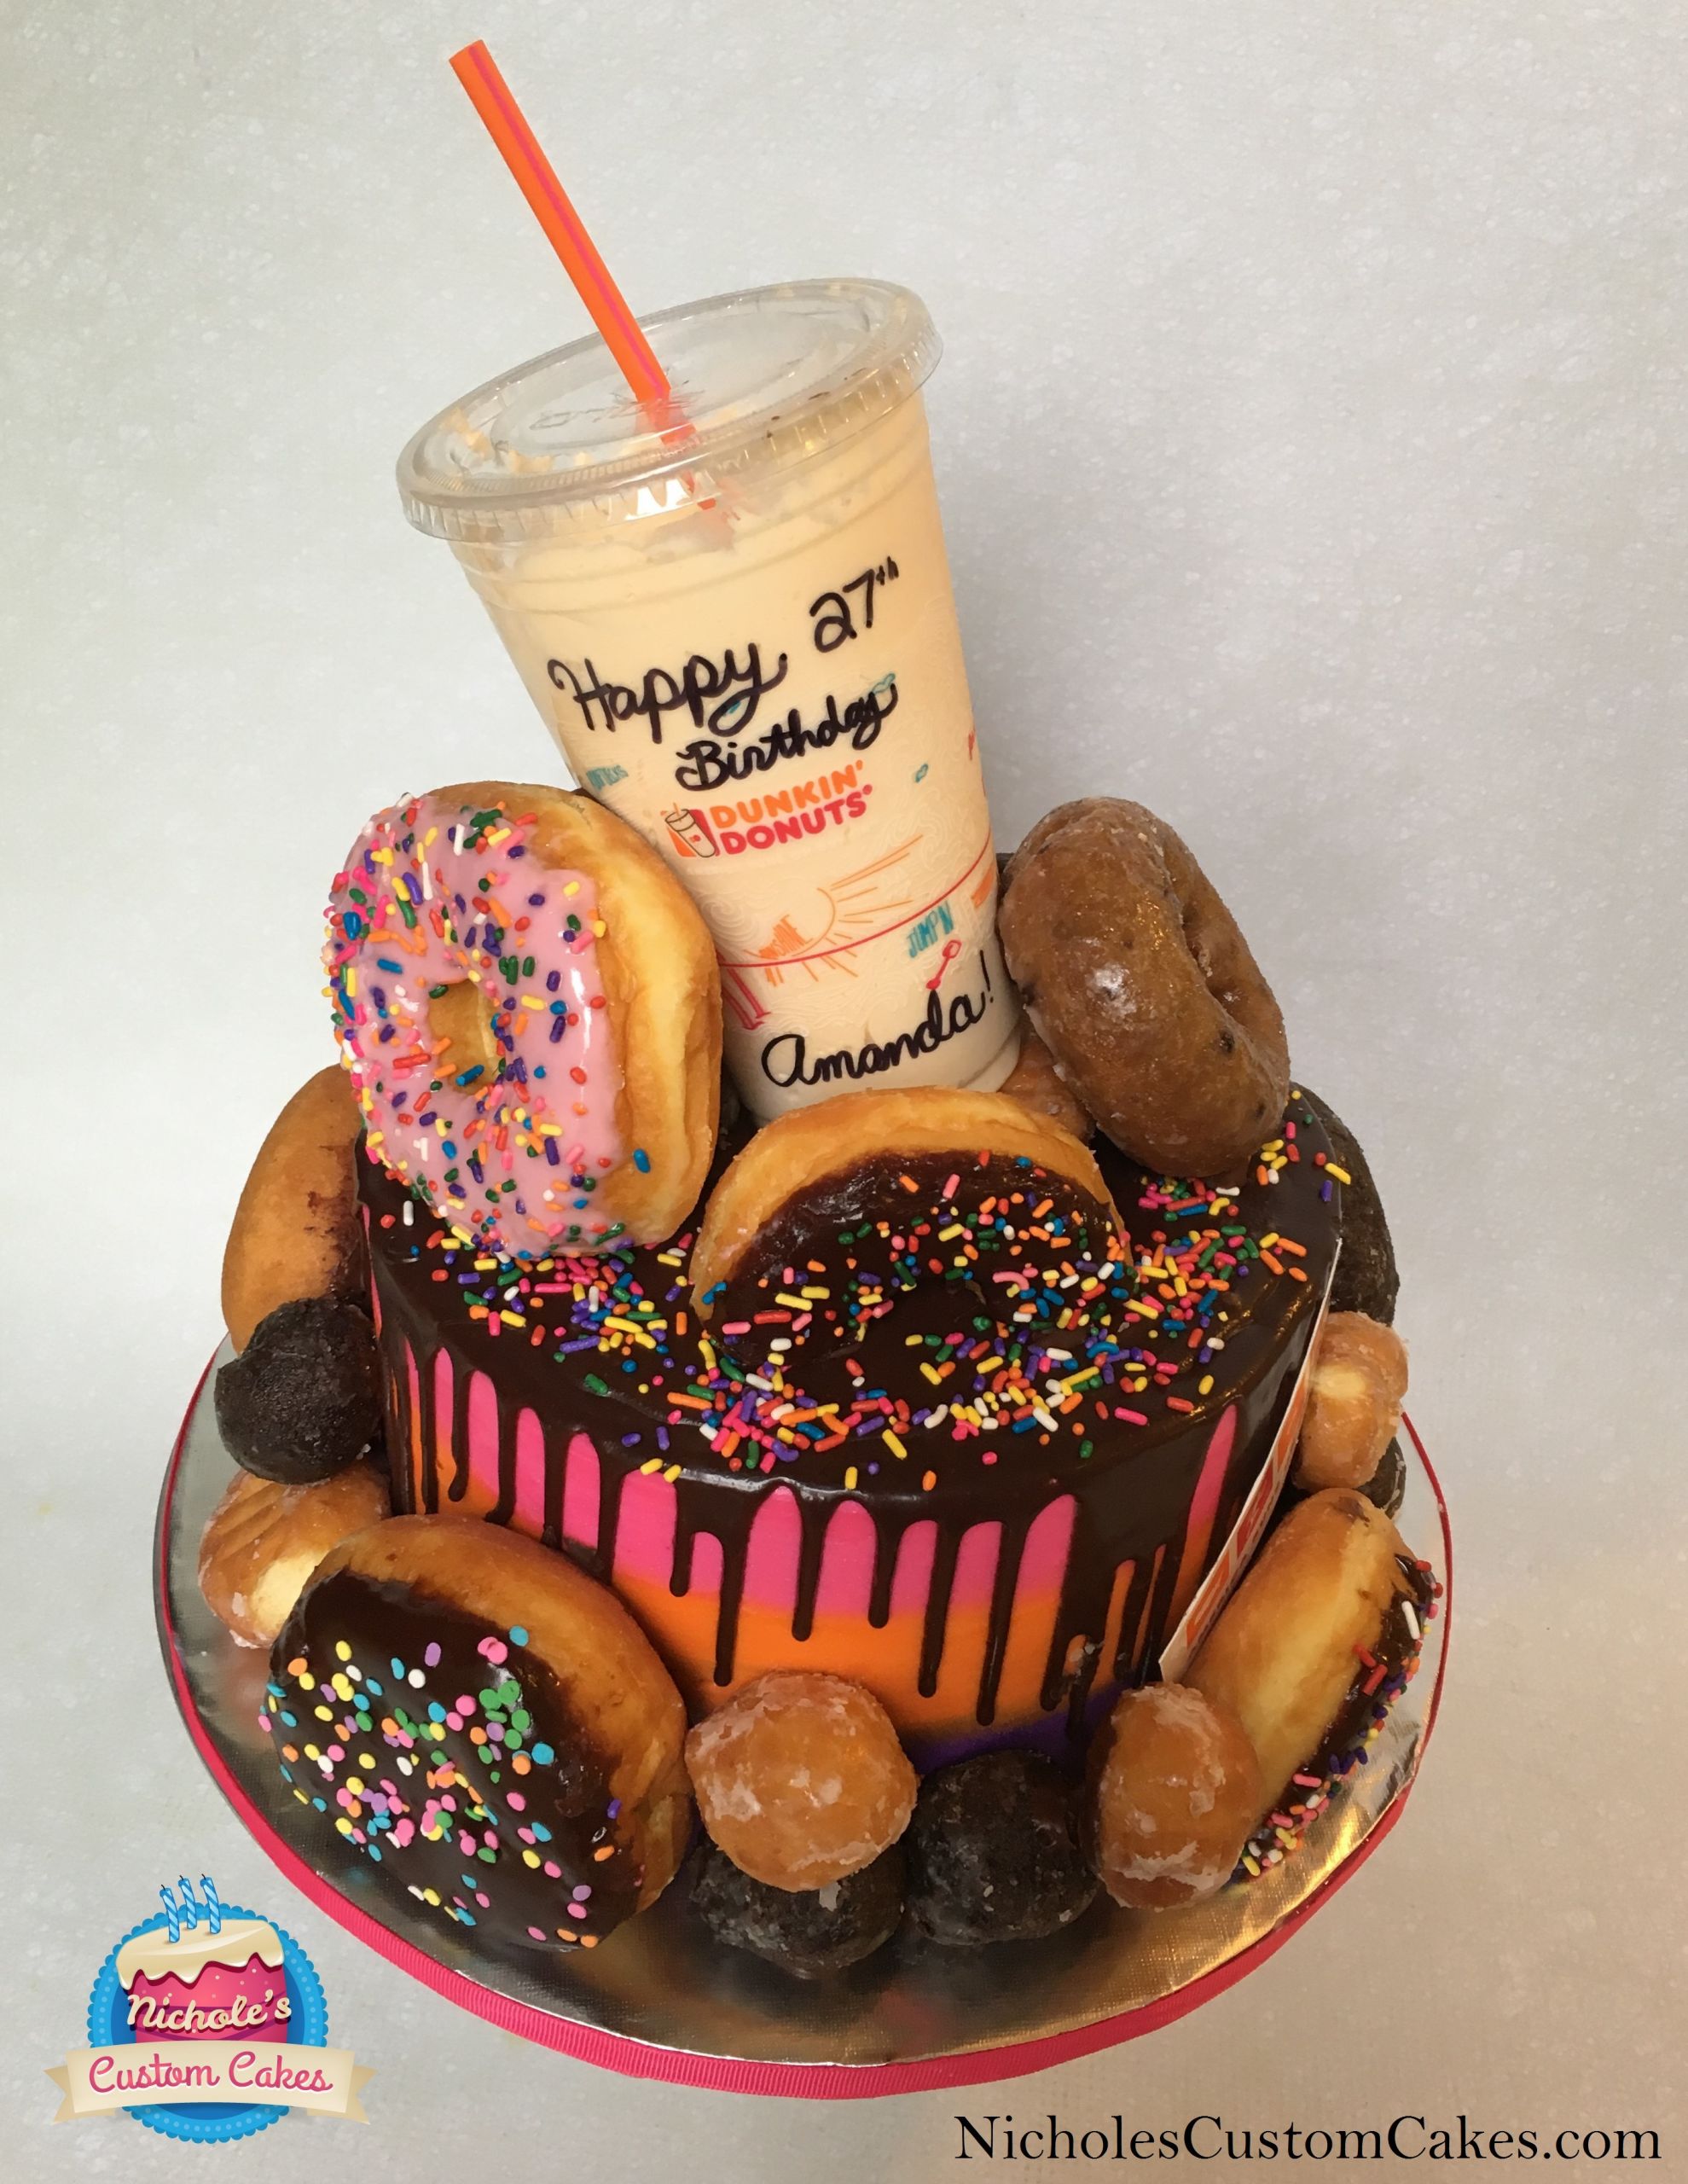 The Best Dunkin Donuts Birthday Cake - Home, Family, Style and Art Ideas